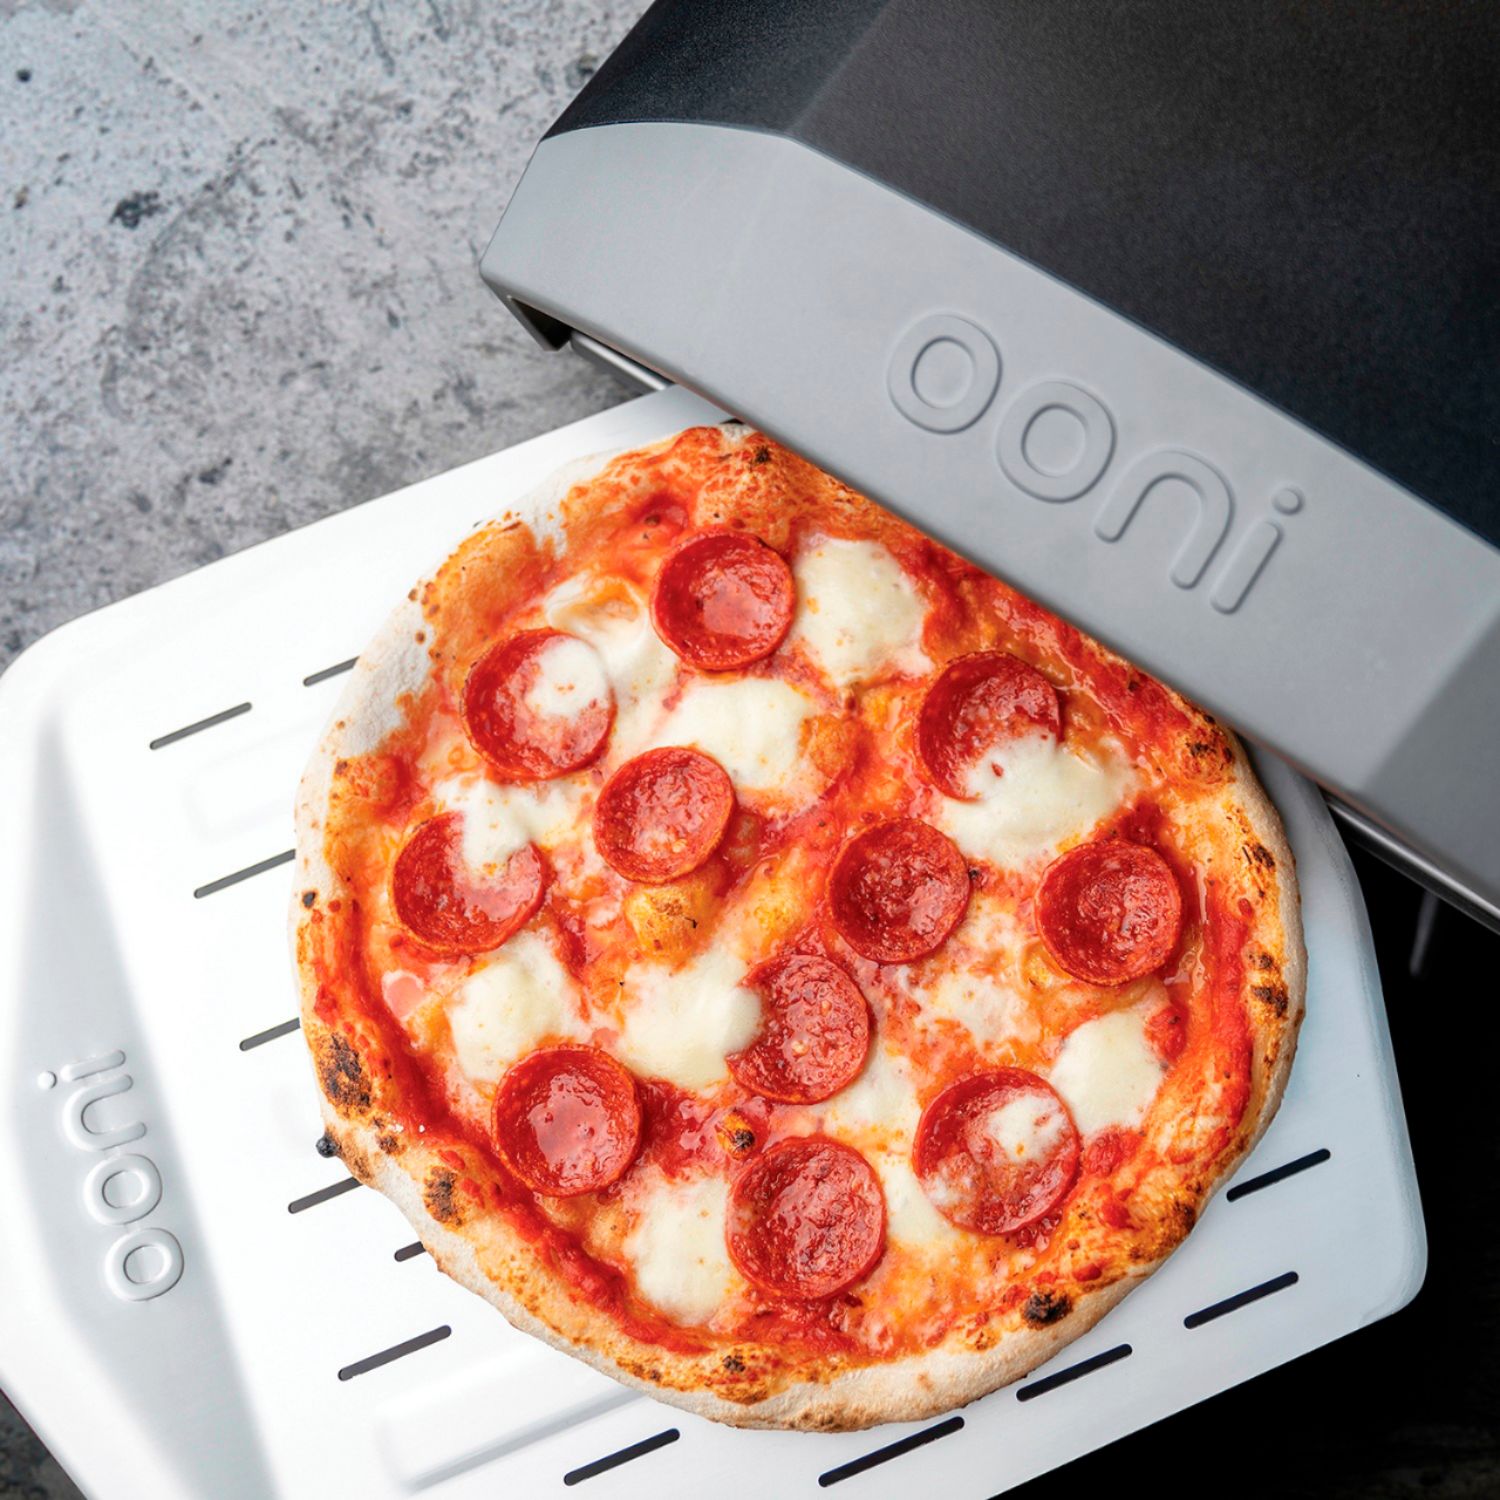 Ooni Karu 12 Inch Portable Pizza Oven Silver UU-P29400/UU-P0A100 - Best Buy